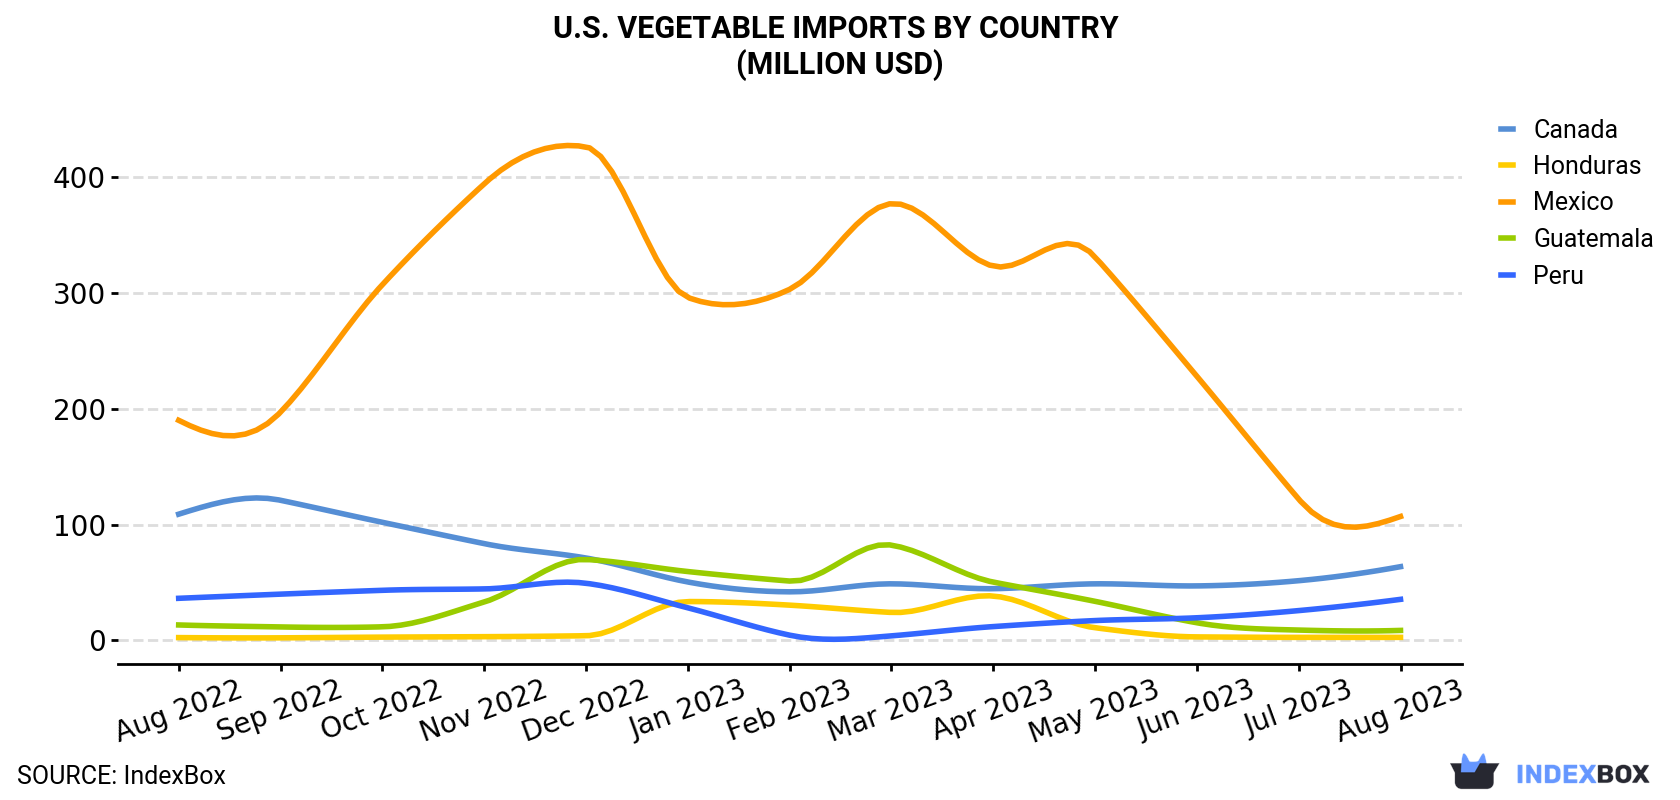 U.S. Vegetable Imports By Country (Million USD)